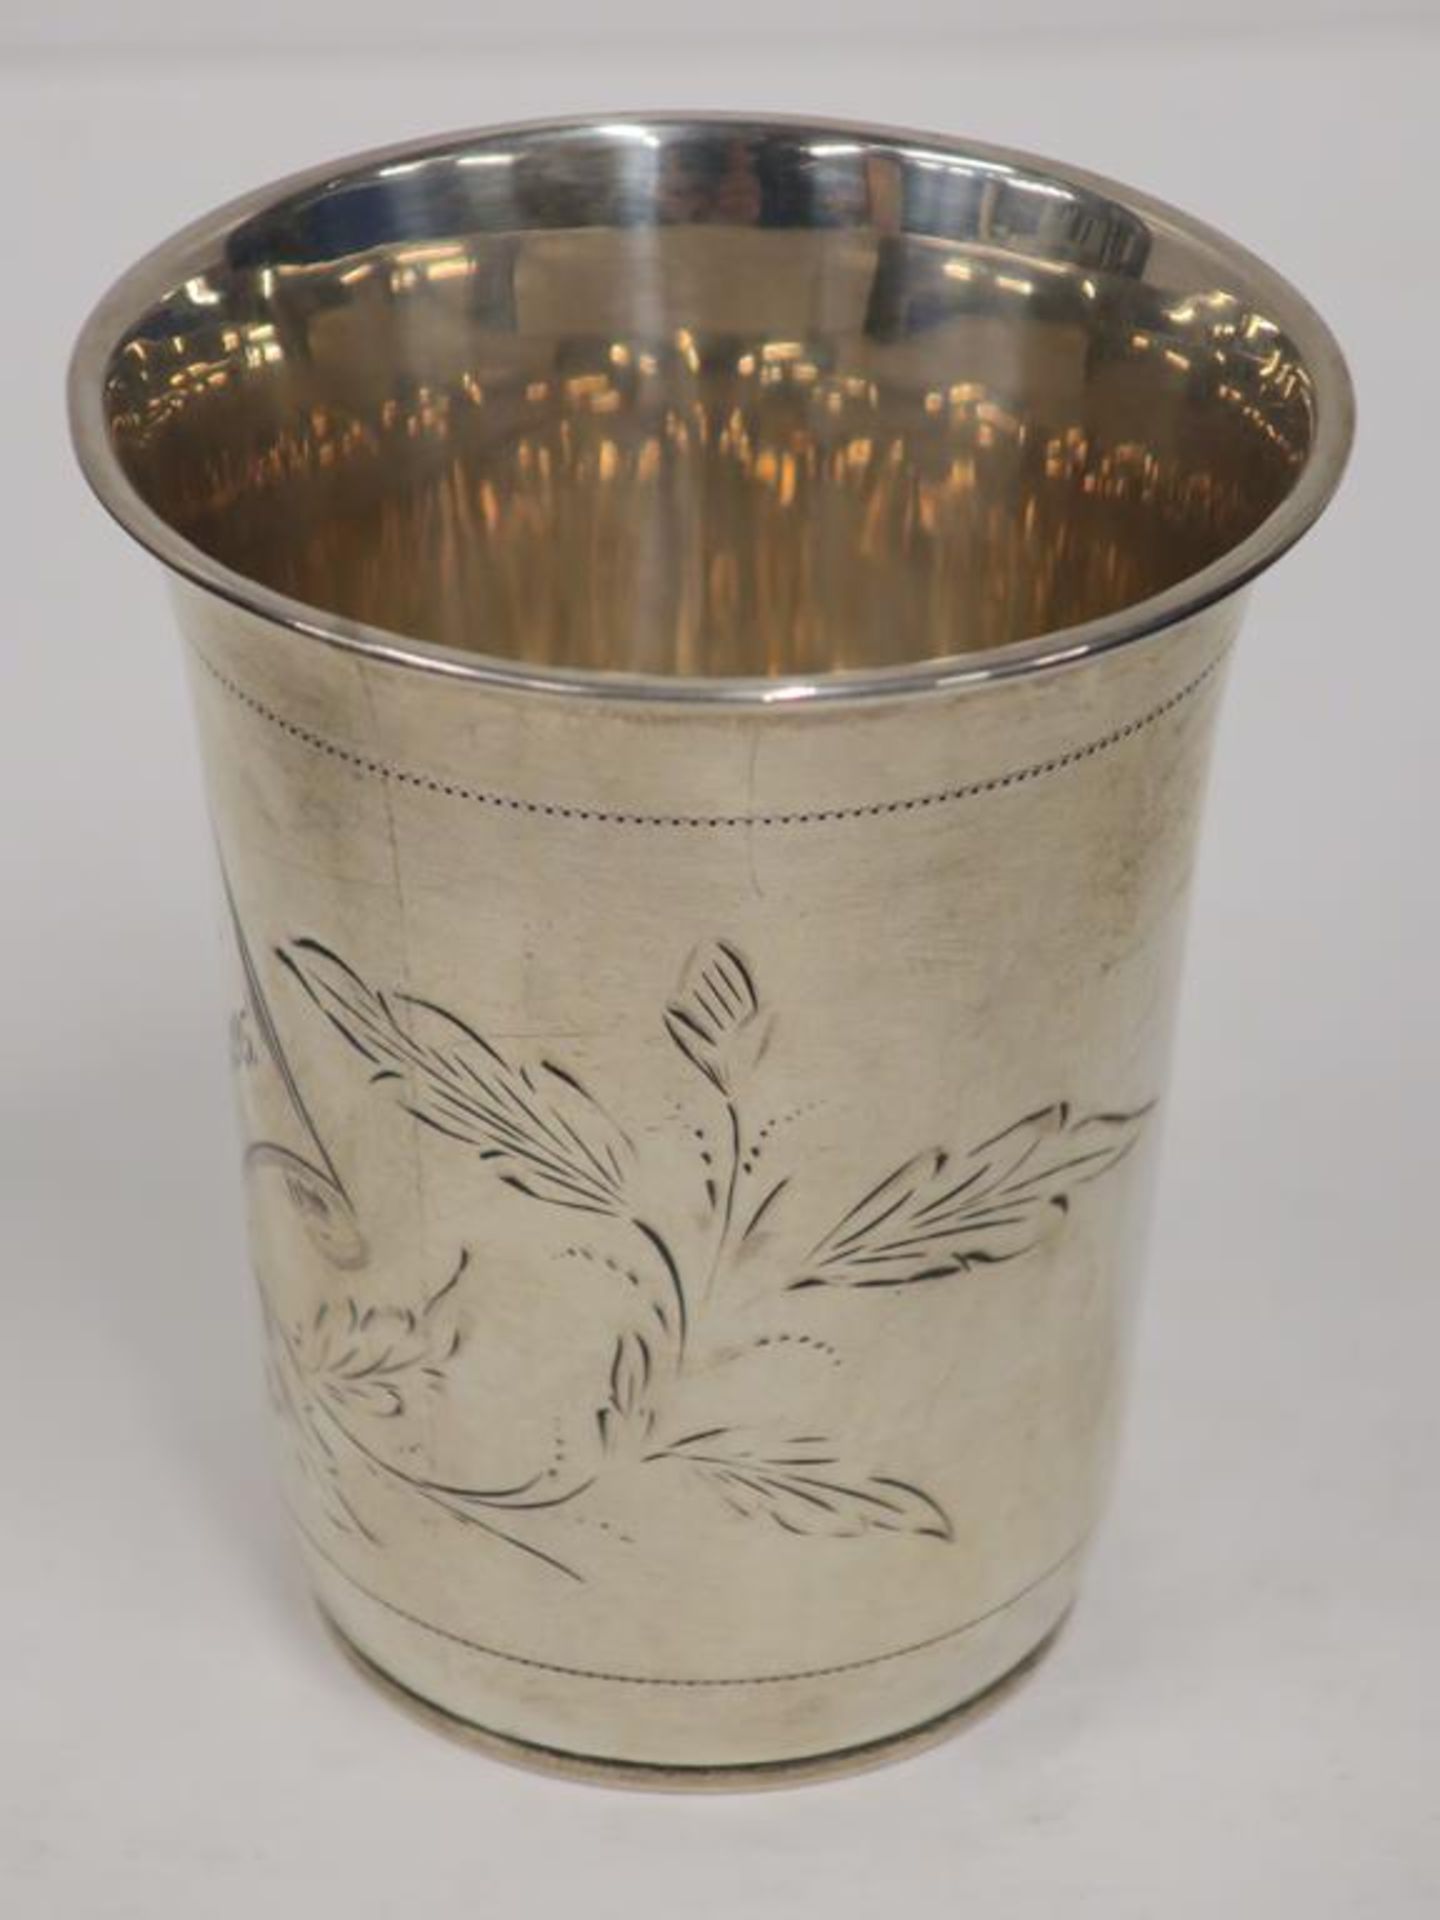 A 19th Century Portuguese Silver Beaker (c 1895, approx 30g) (est £30-£60) - Image 4 of 4